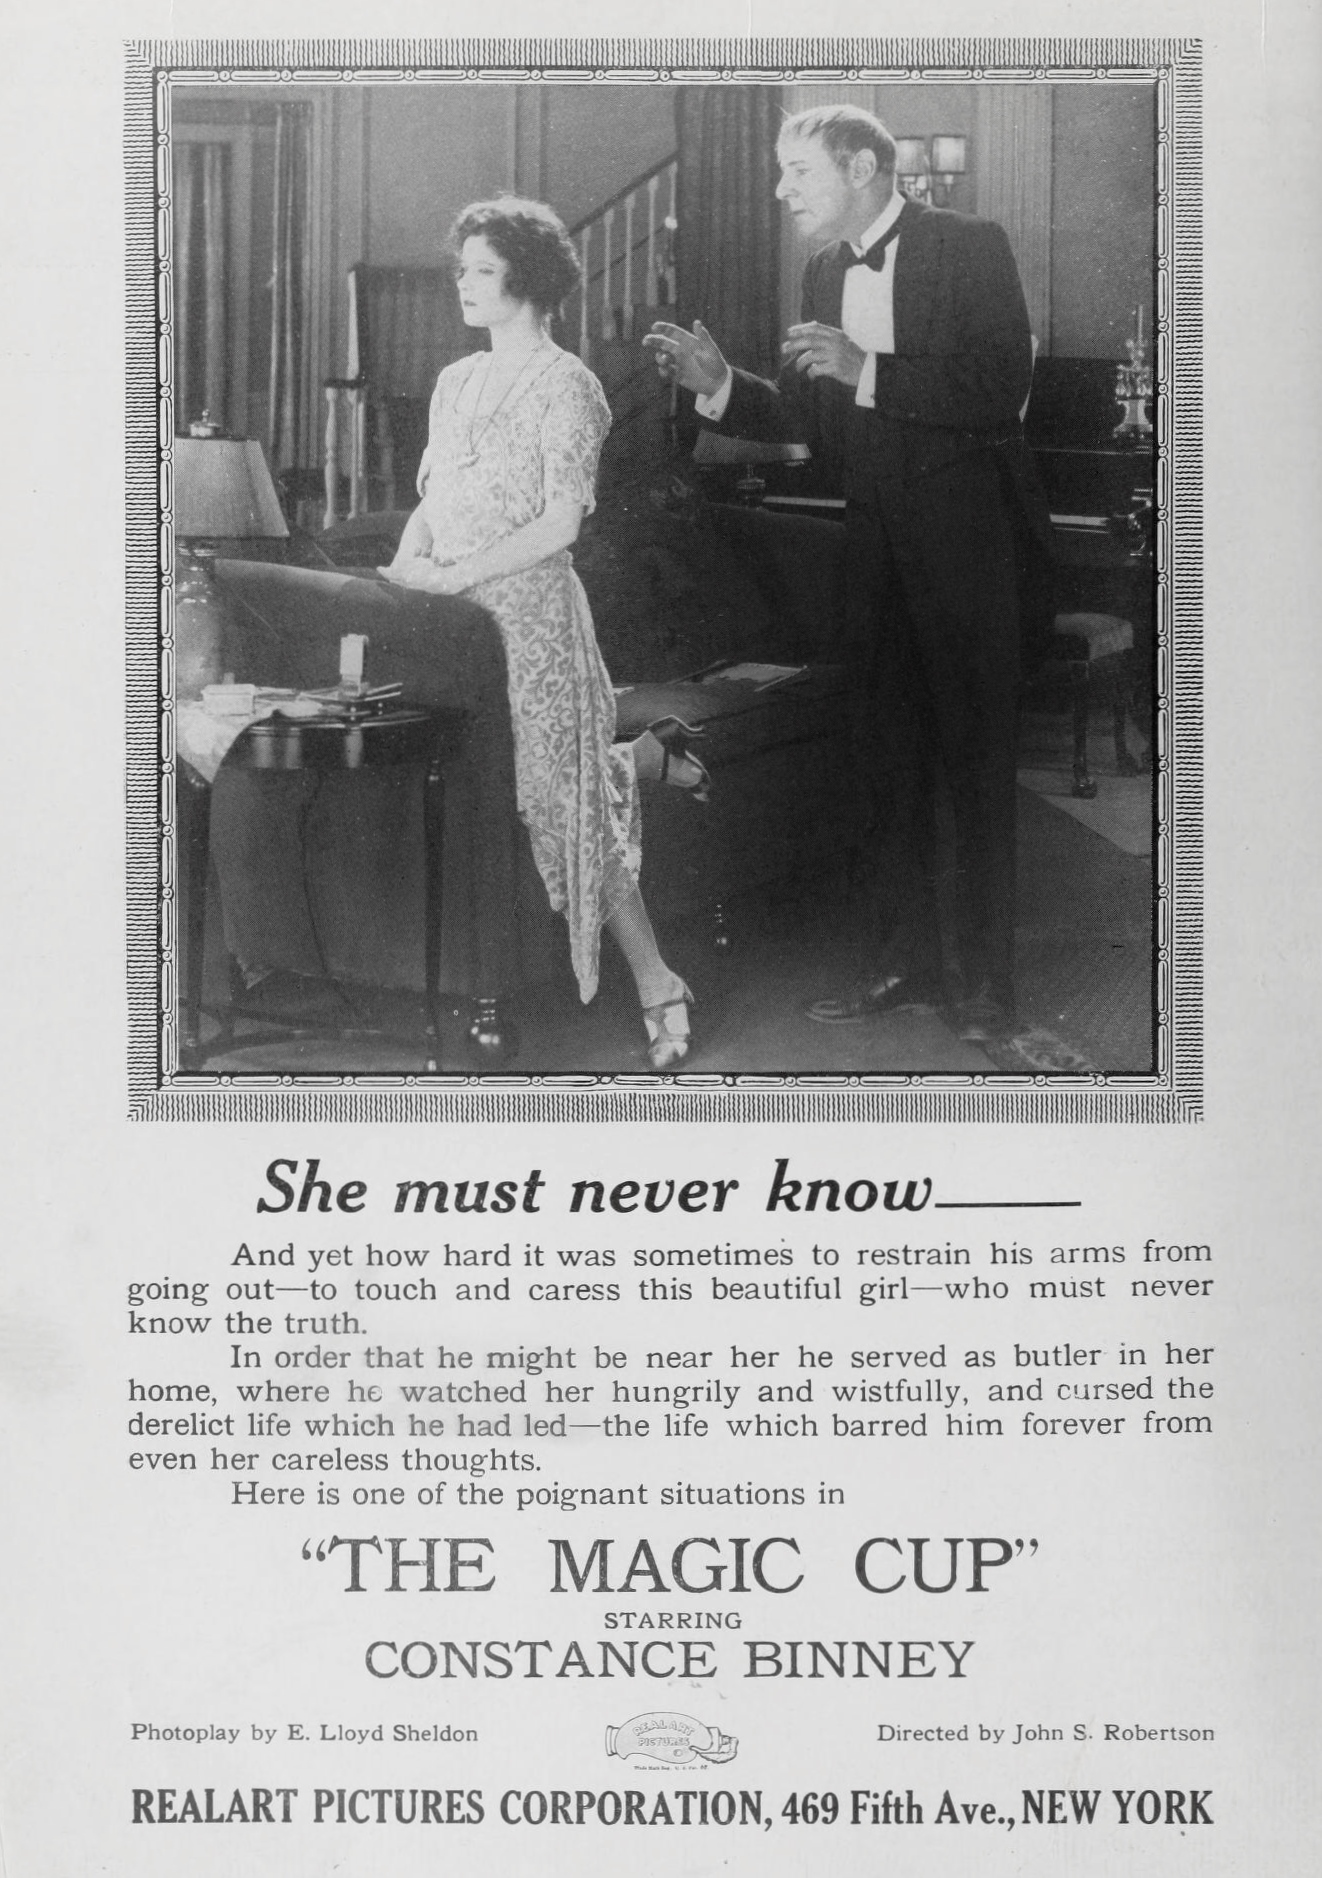 The Magic Cup